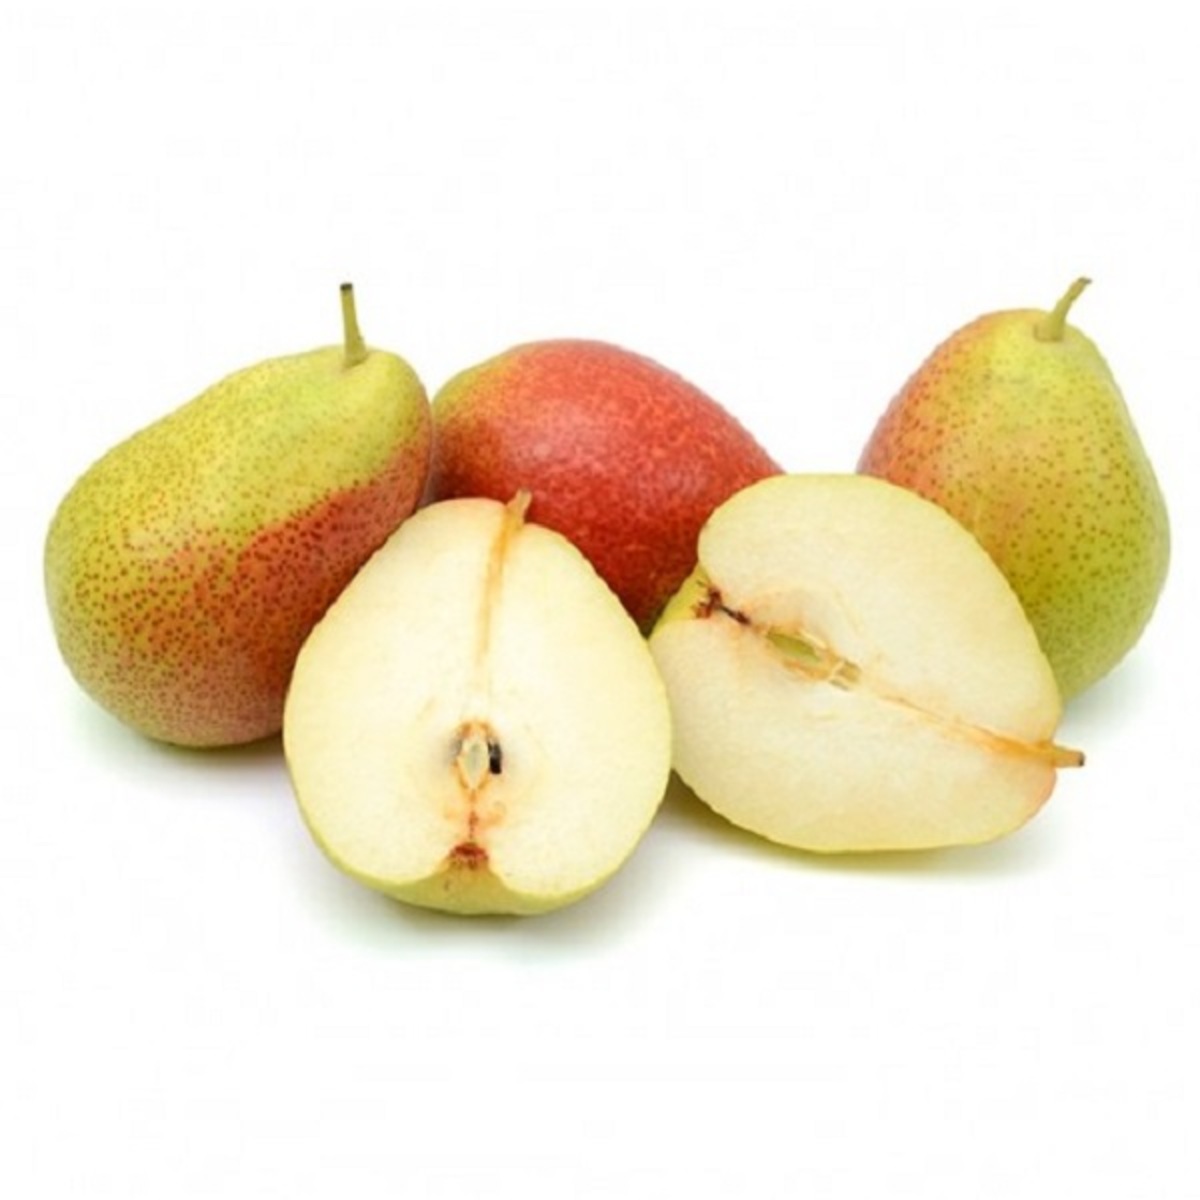 Pears Forelle  approx. 450gm-500gm